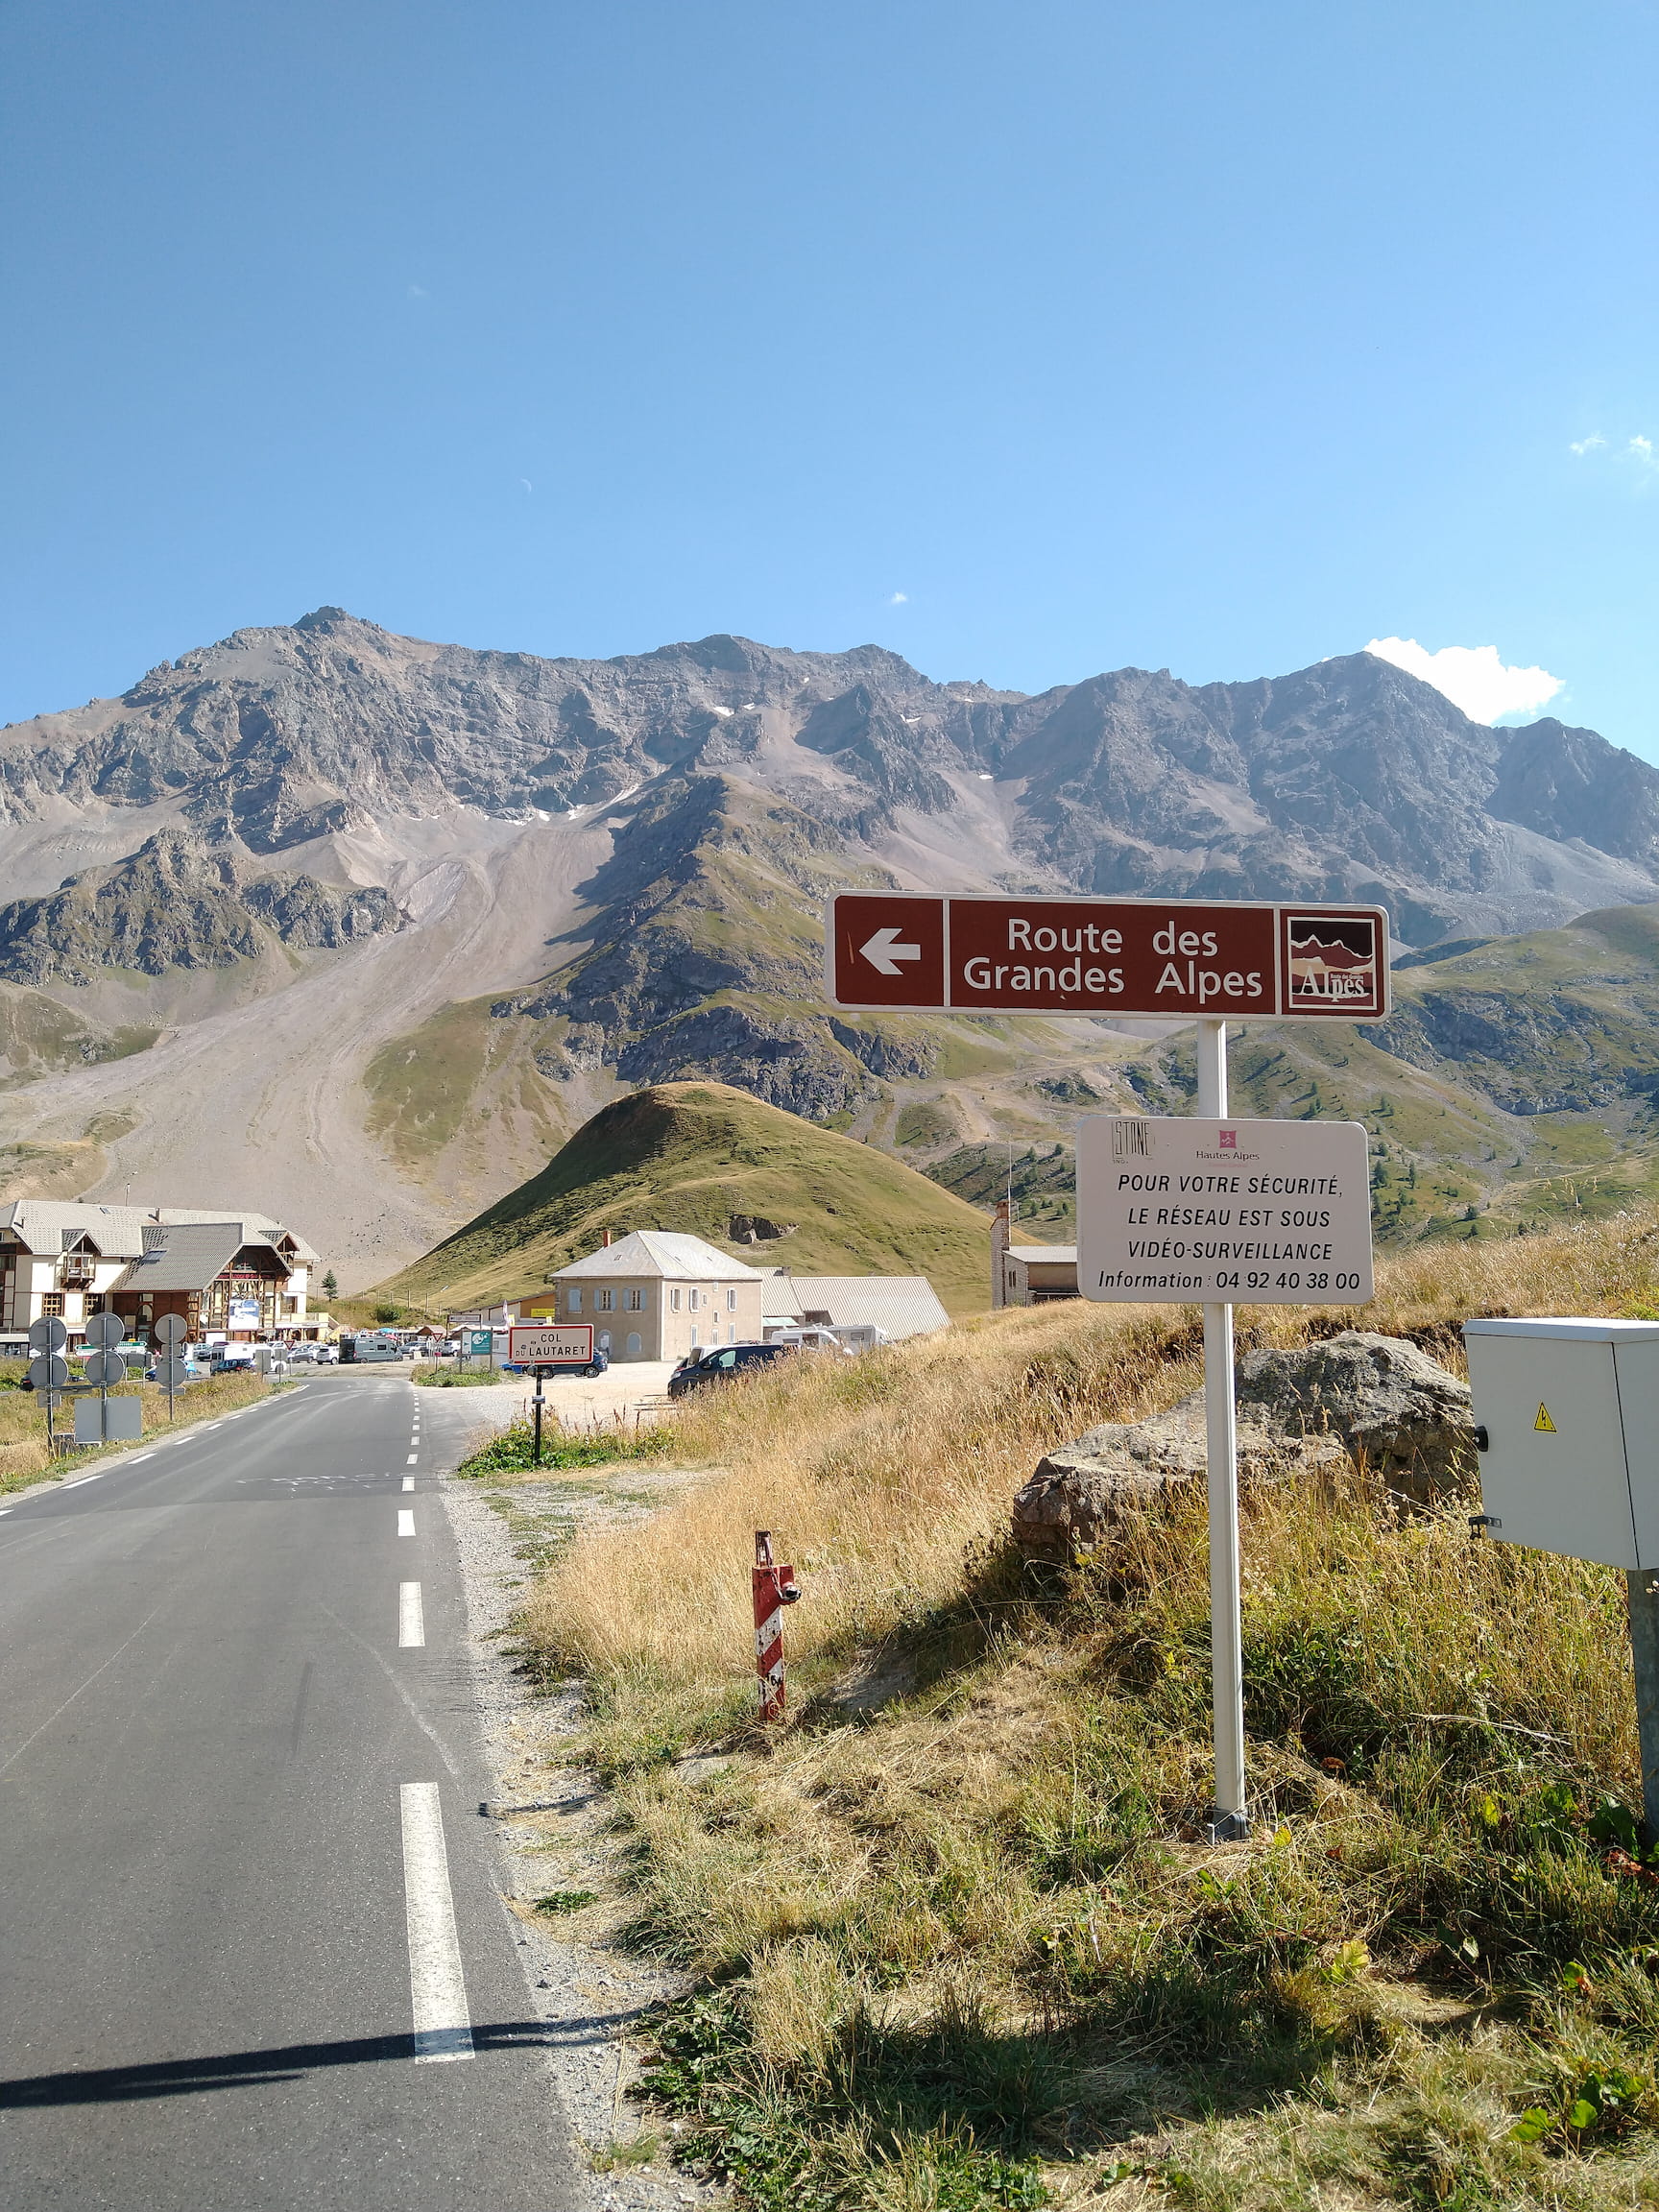 Street sign for the 'Route des Grandes Alpes'